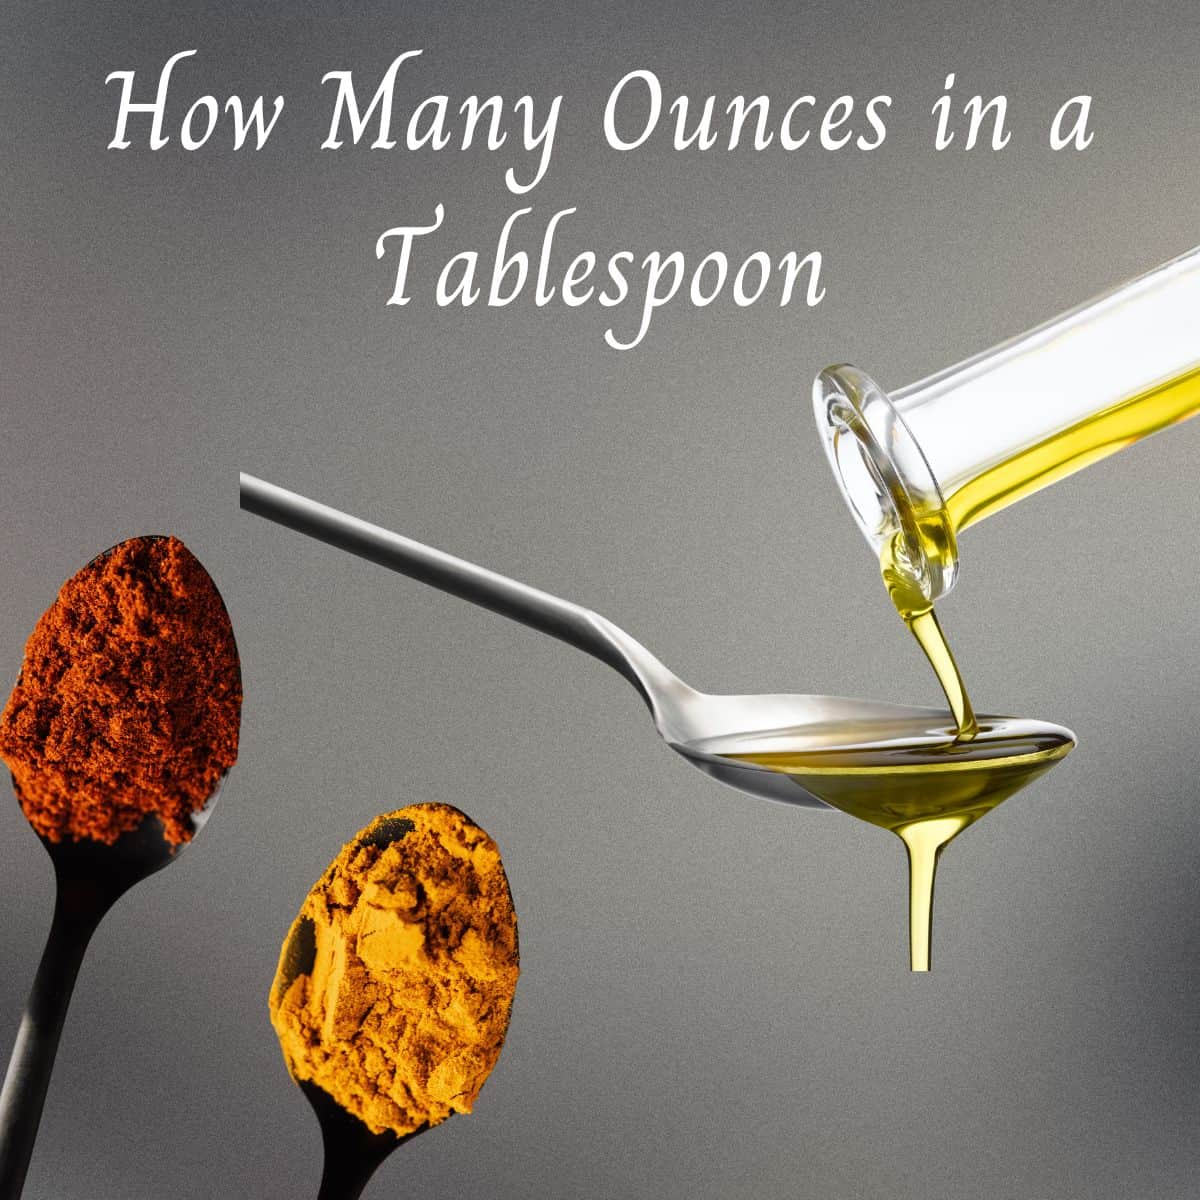 oil and spices in tablespoons to understand how many ounces in a tablespoon